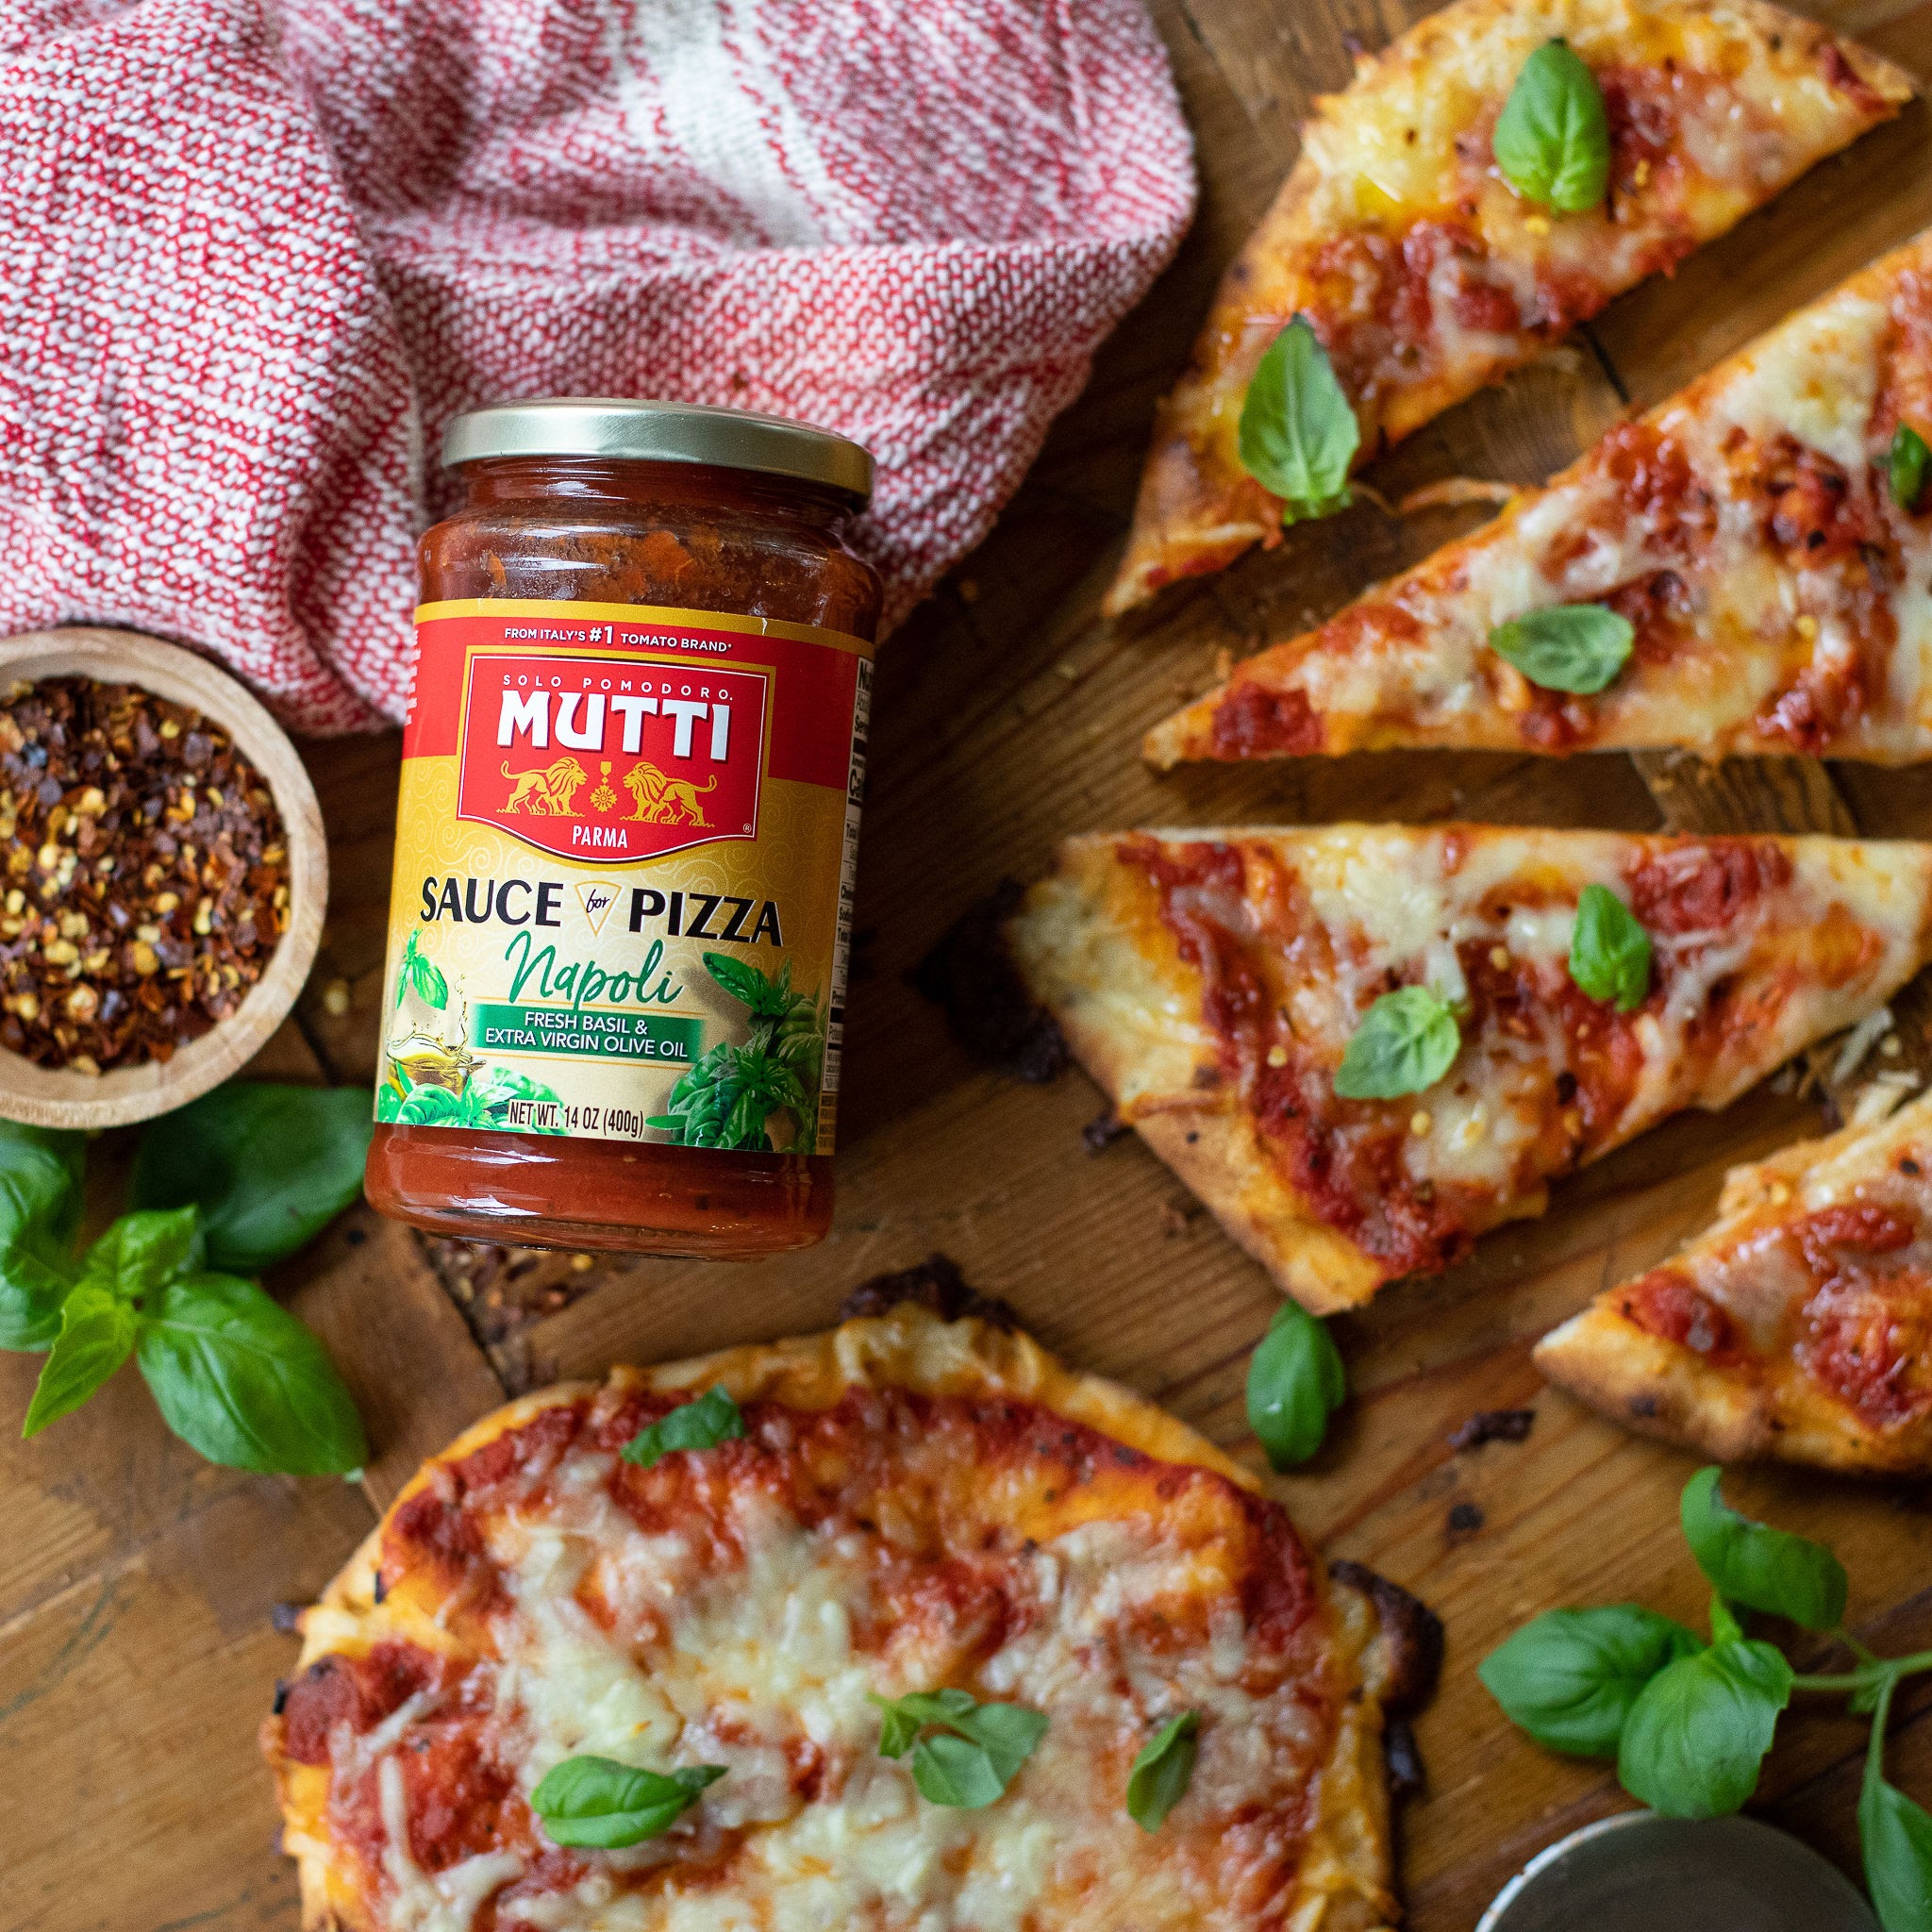 Mutti® Sauces for Pizza Are Perfect For ANY Homemade Pizza Creation - Save At Publix Right Now on I Heart Publix 1